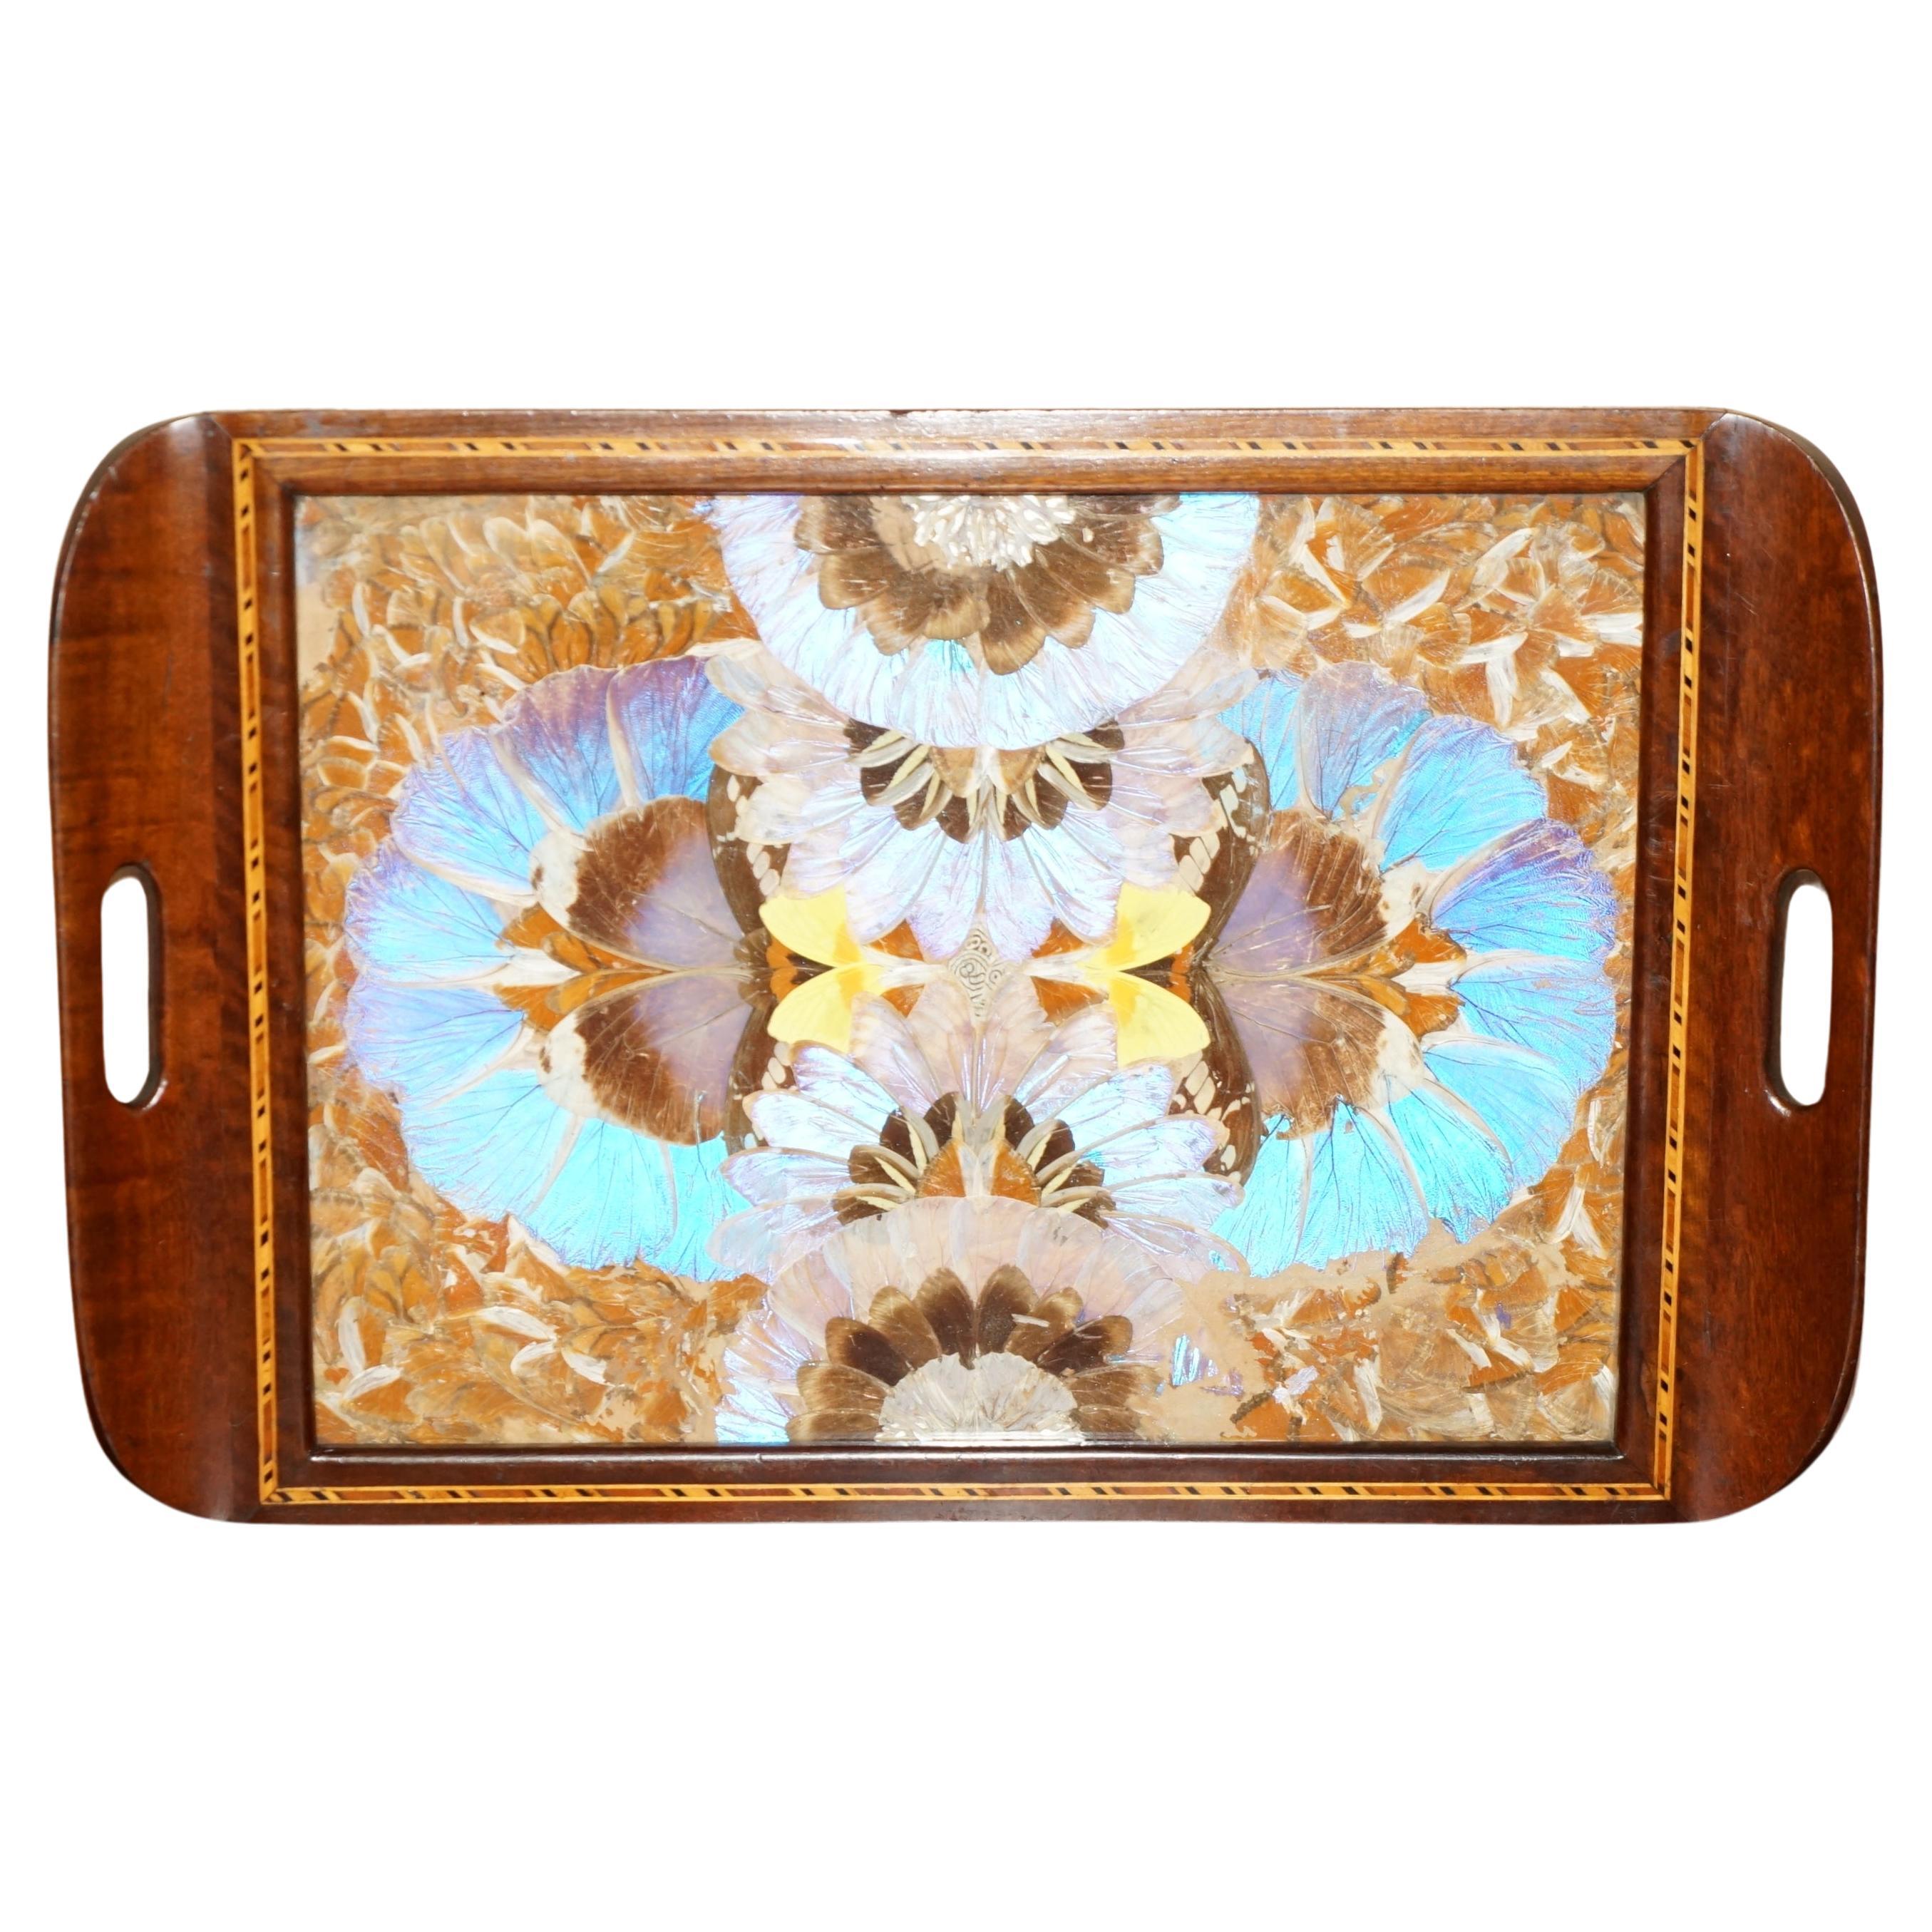 EXQUiSITE RIO DE JANEIRO BRAZILIAN HARDWOOD BUTTERFLY WING BUTLERS SERVING TRAY For Sale